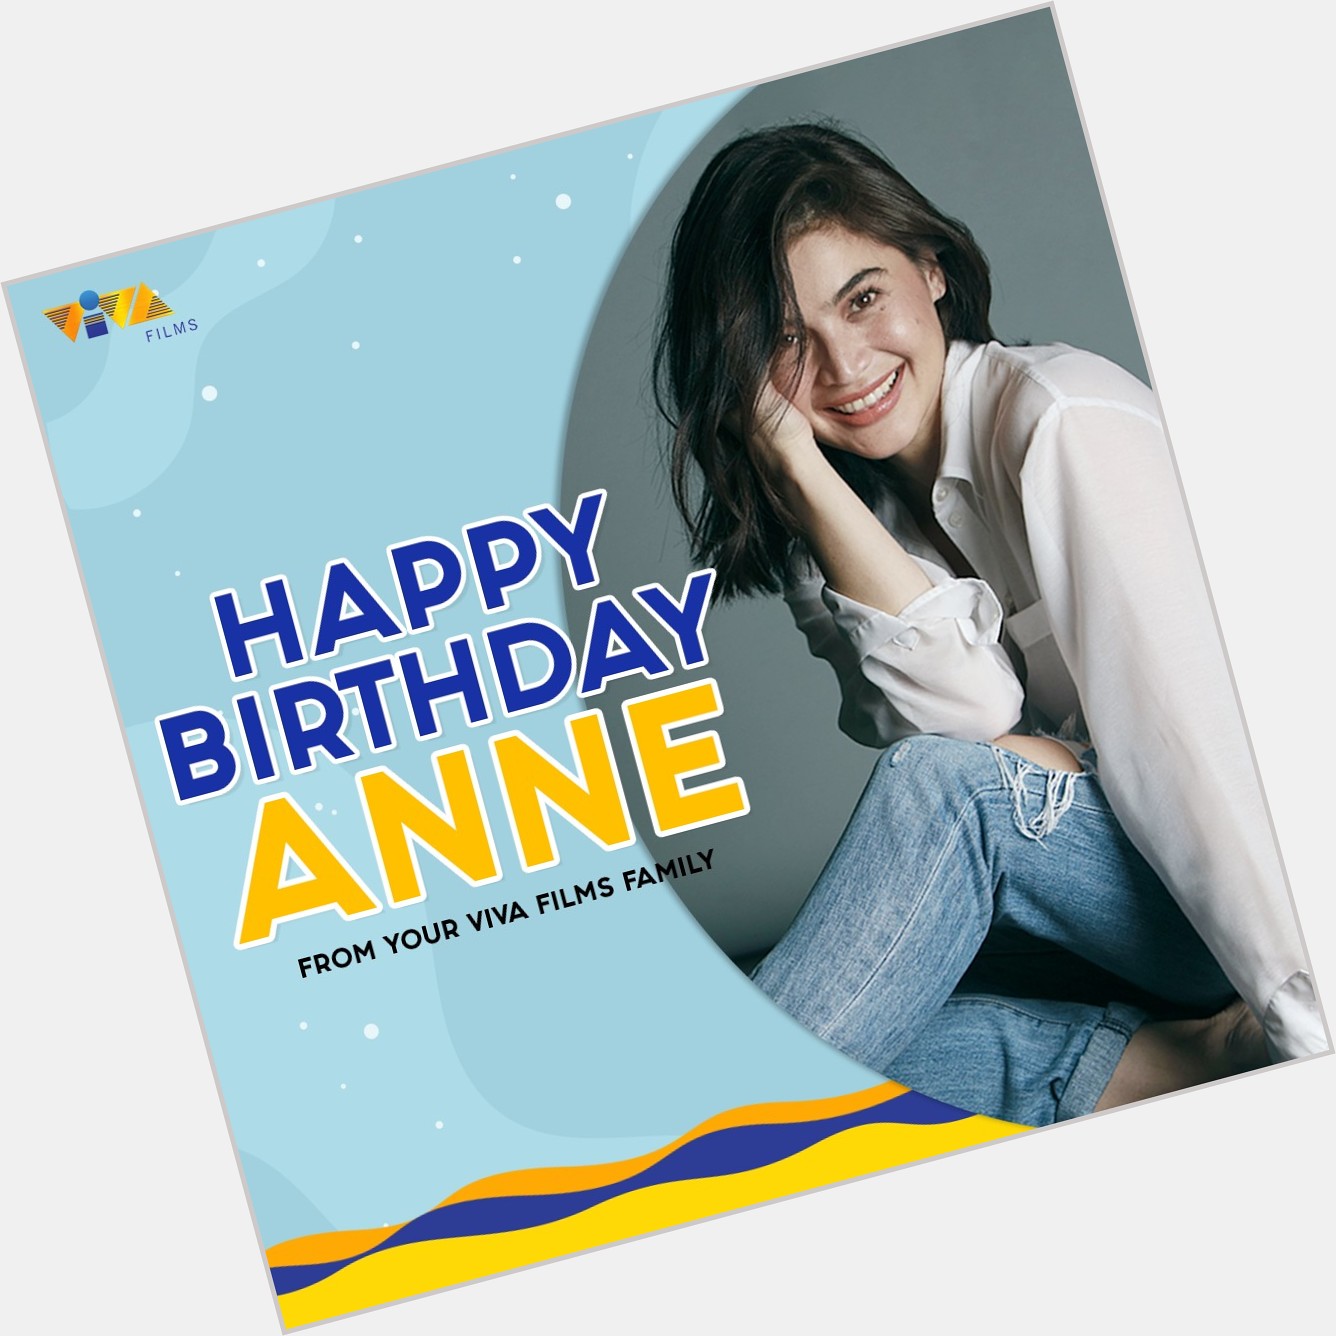 Happy birthday Anne Curtis! We wish you all the best on your special day. 

Love, your Viva Films family. 